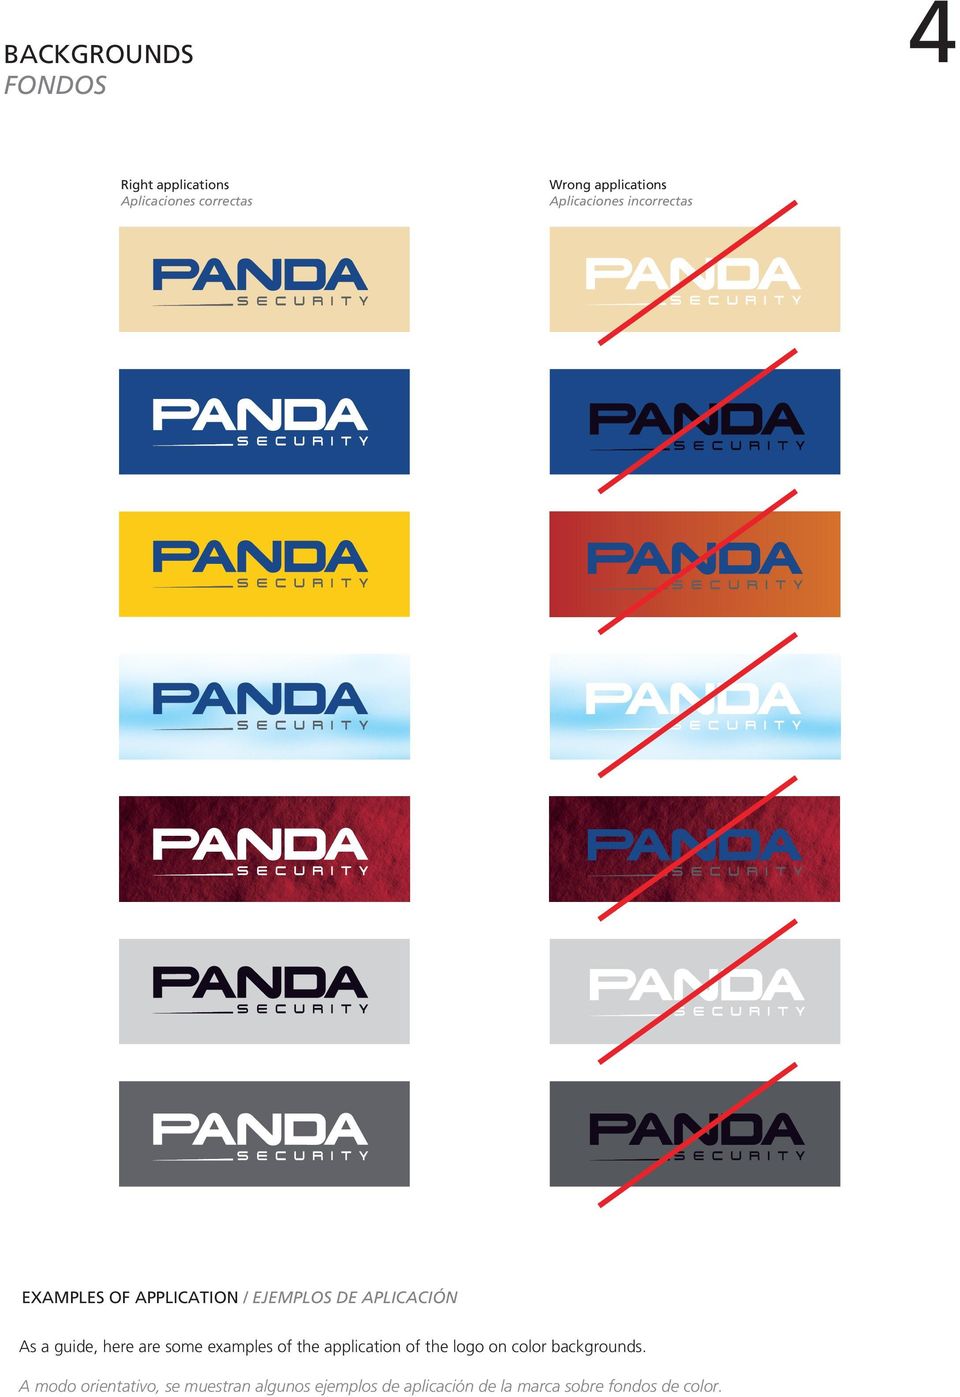 here are some examples of the application of the logo on color backgrounds.